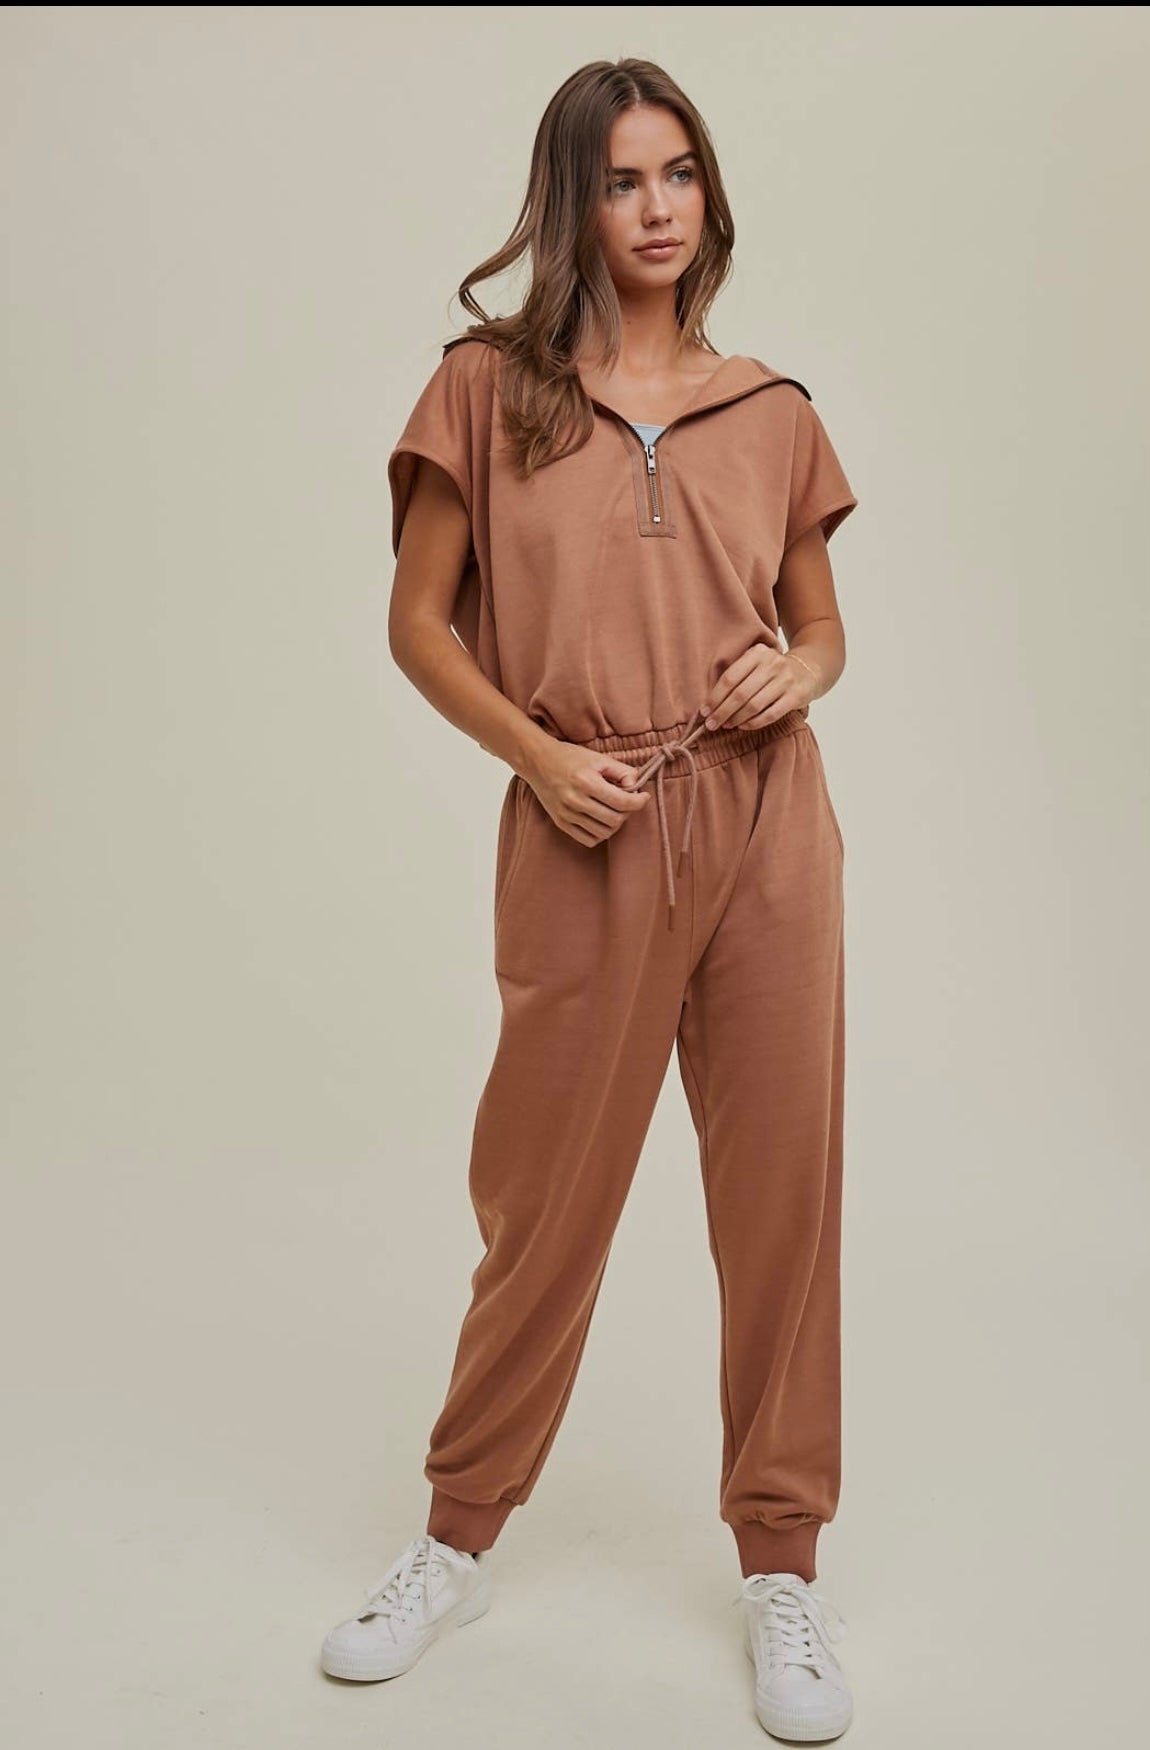 French Terry hooded jumpsuit by Wishlist Apparel - terracotta - Blue Sky Fashions & Lingerie